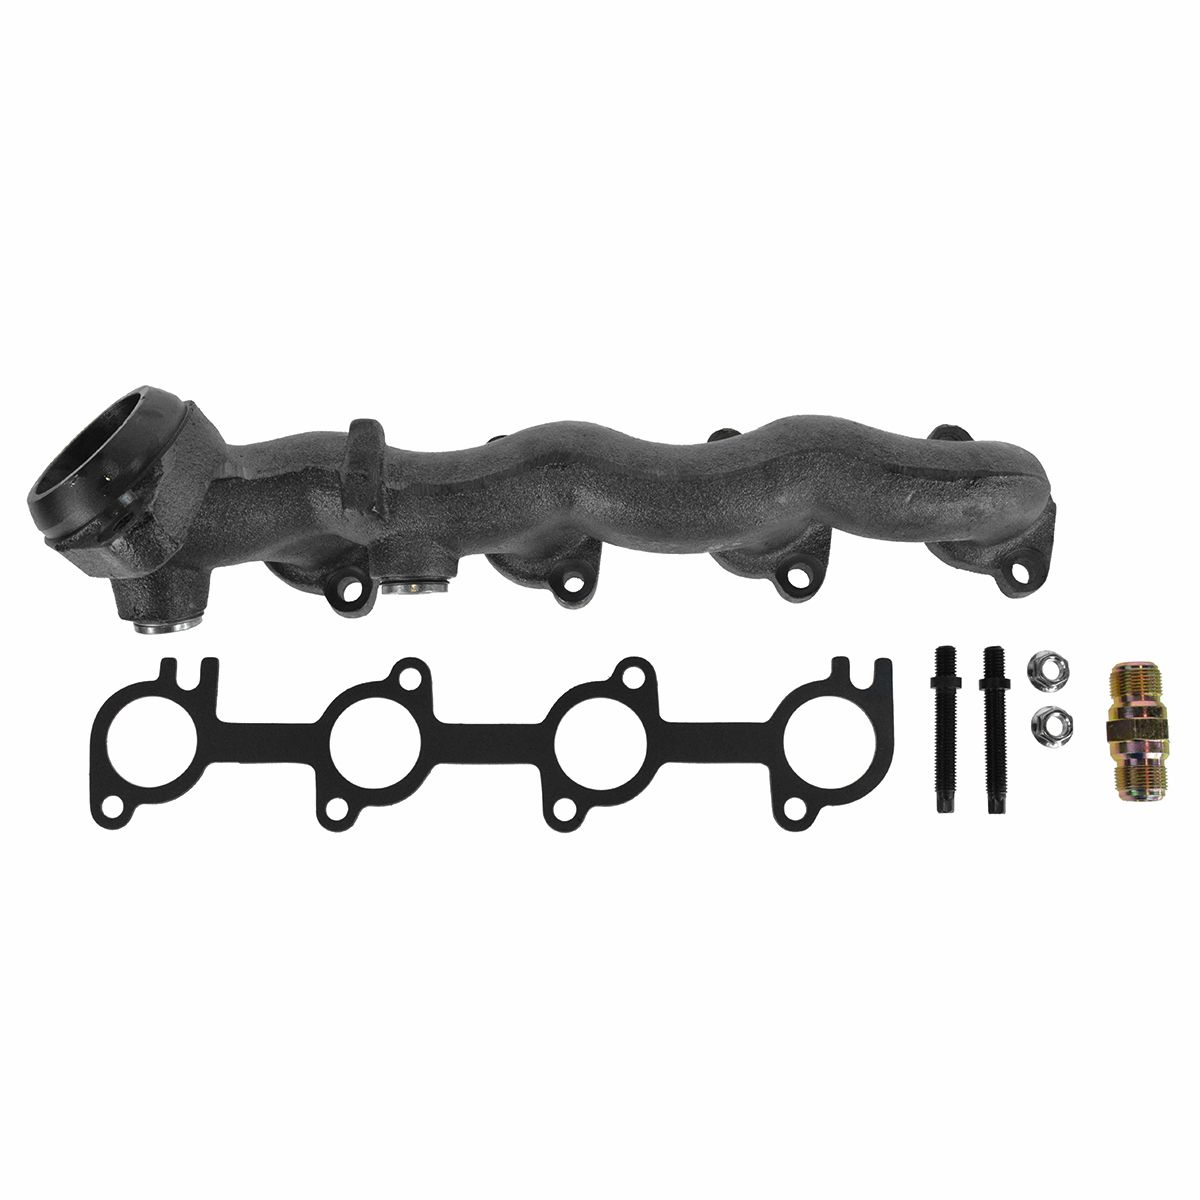 NEW Ford 1997-1998 F-150 4.6L V8 LEFT Exhaust Manifold